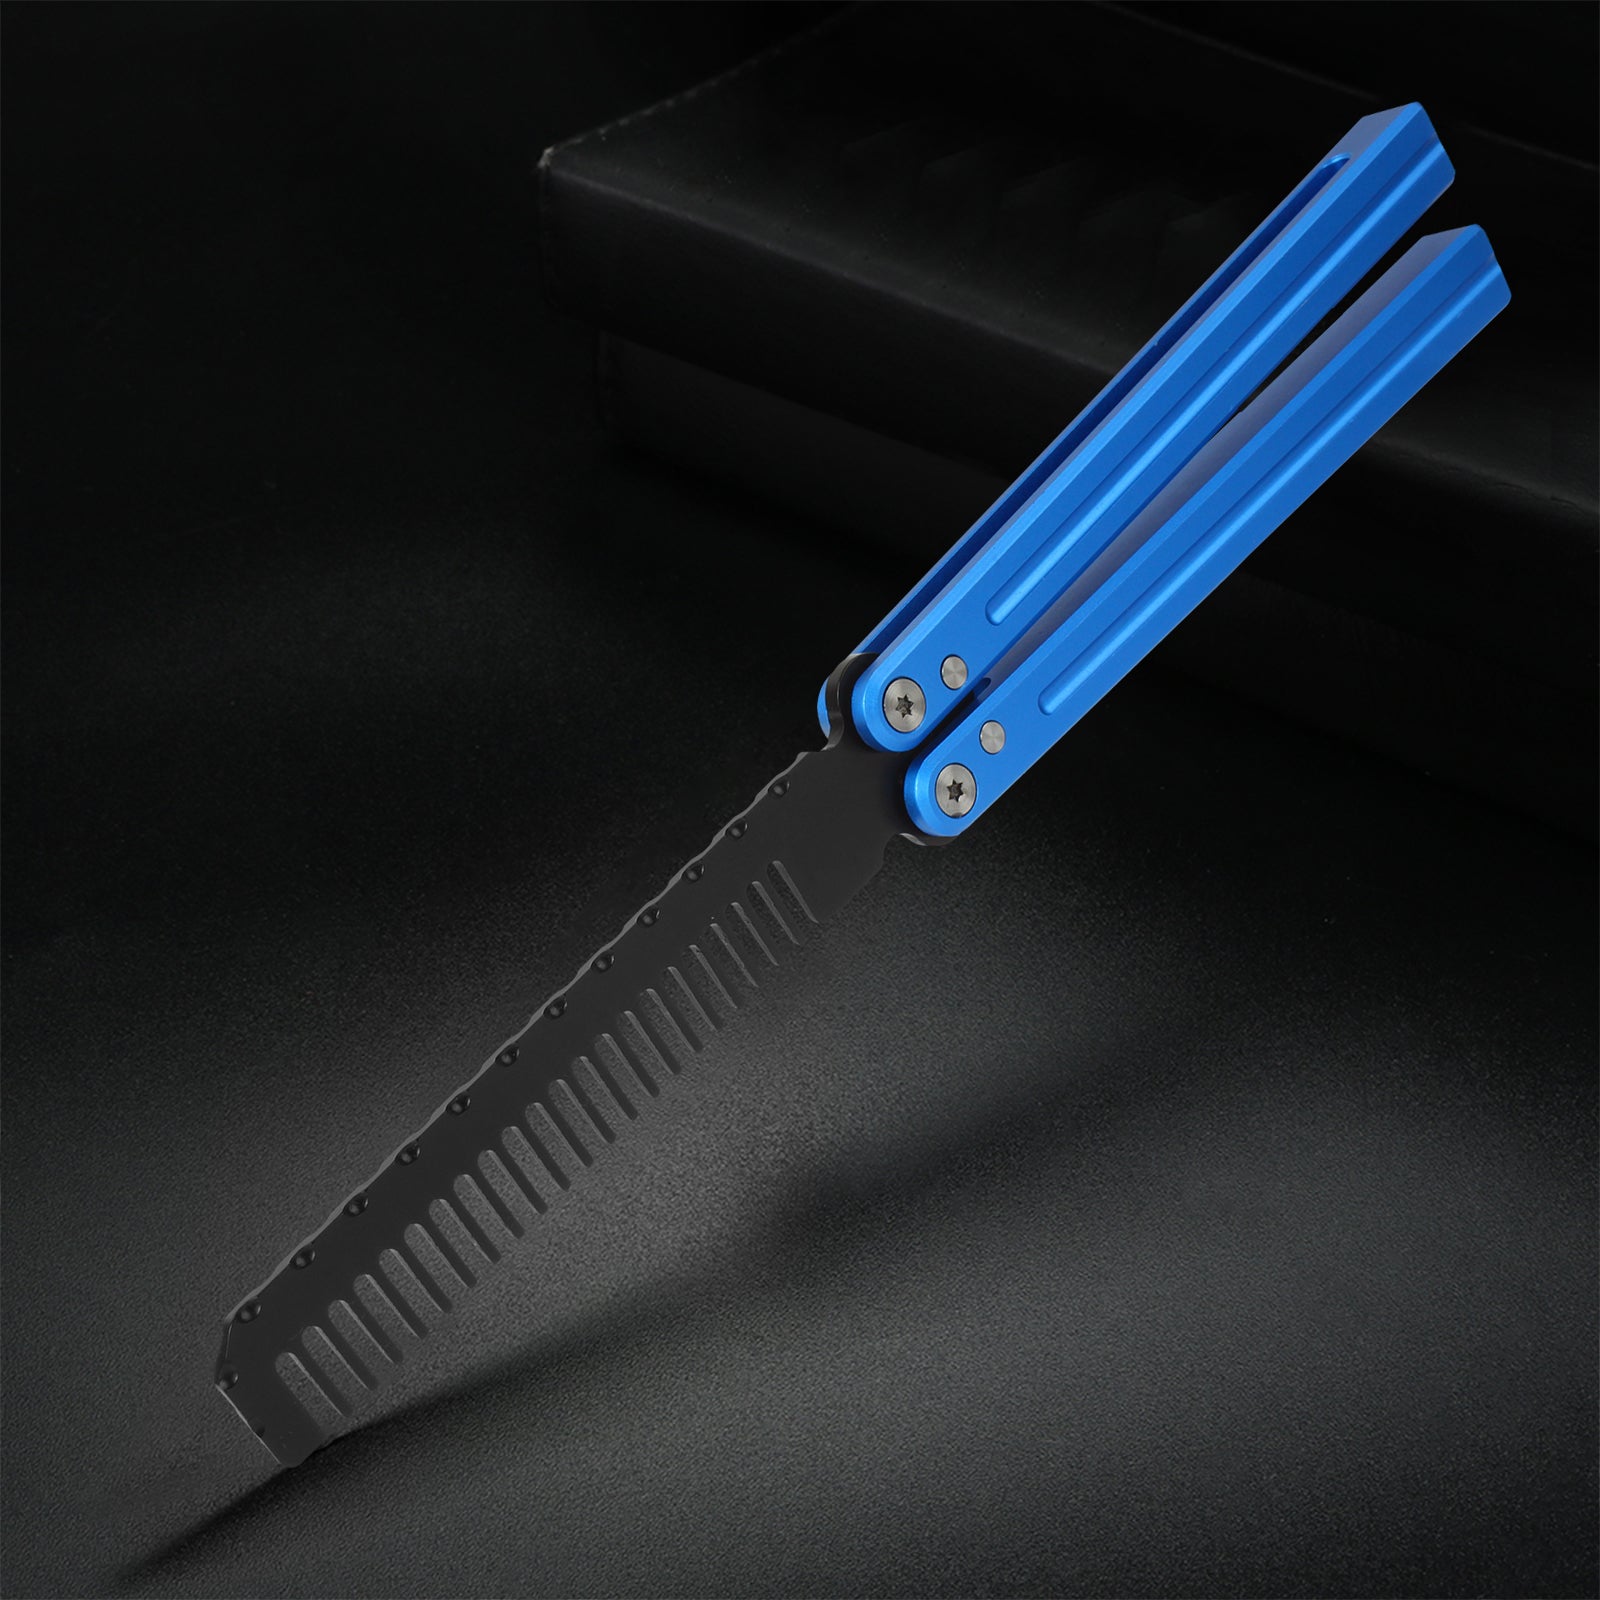 Andux 7075 Aluminum Balisong Butterfly Knife Comb CNC Effective Bushing System Training Tool Lock Free (Blue) CNC-S01